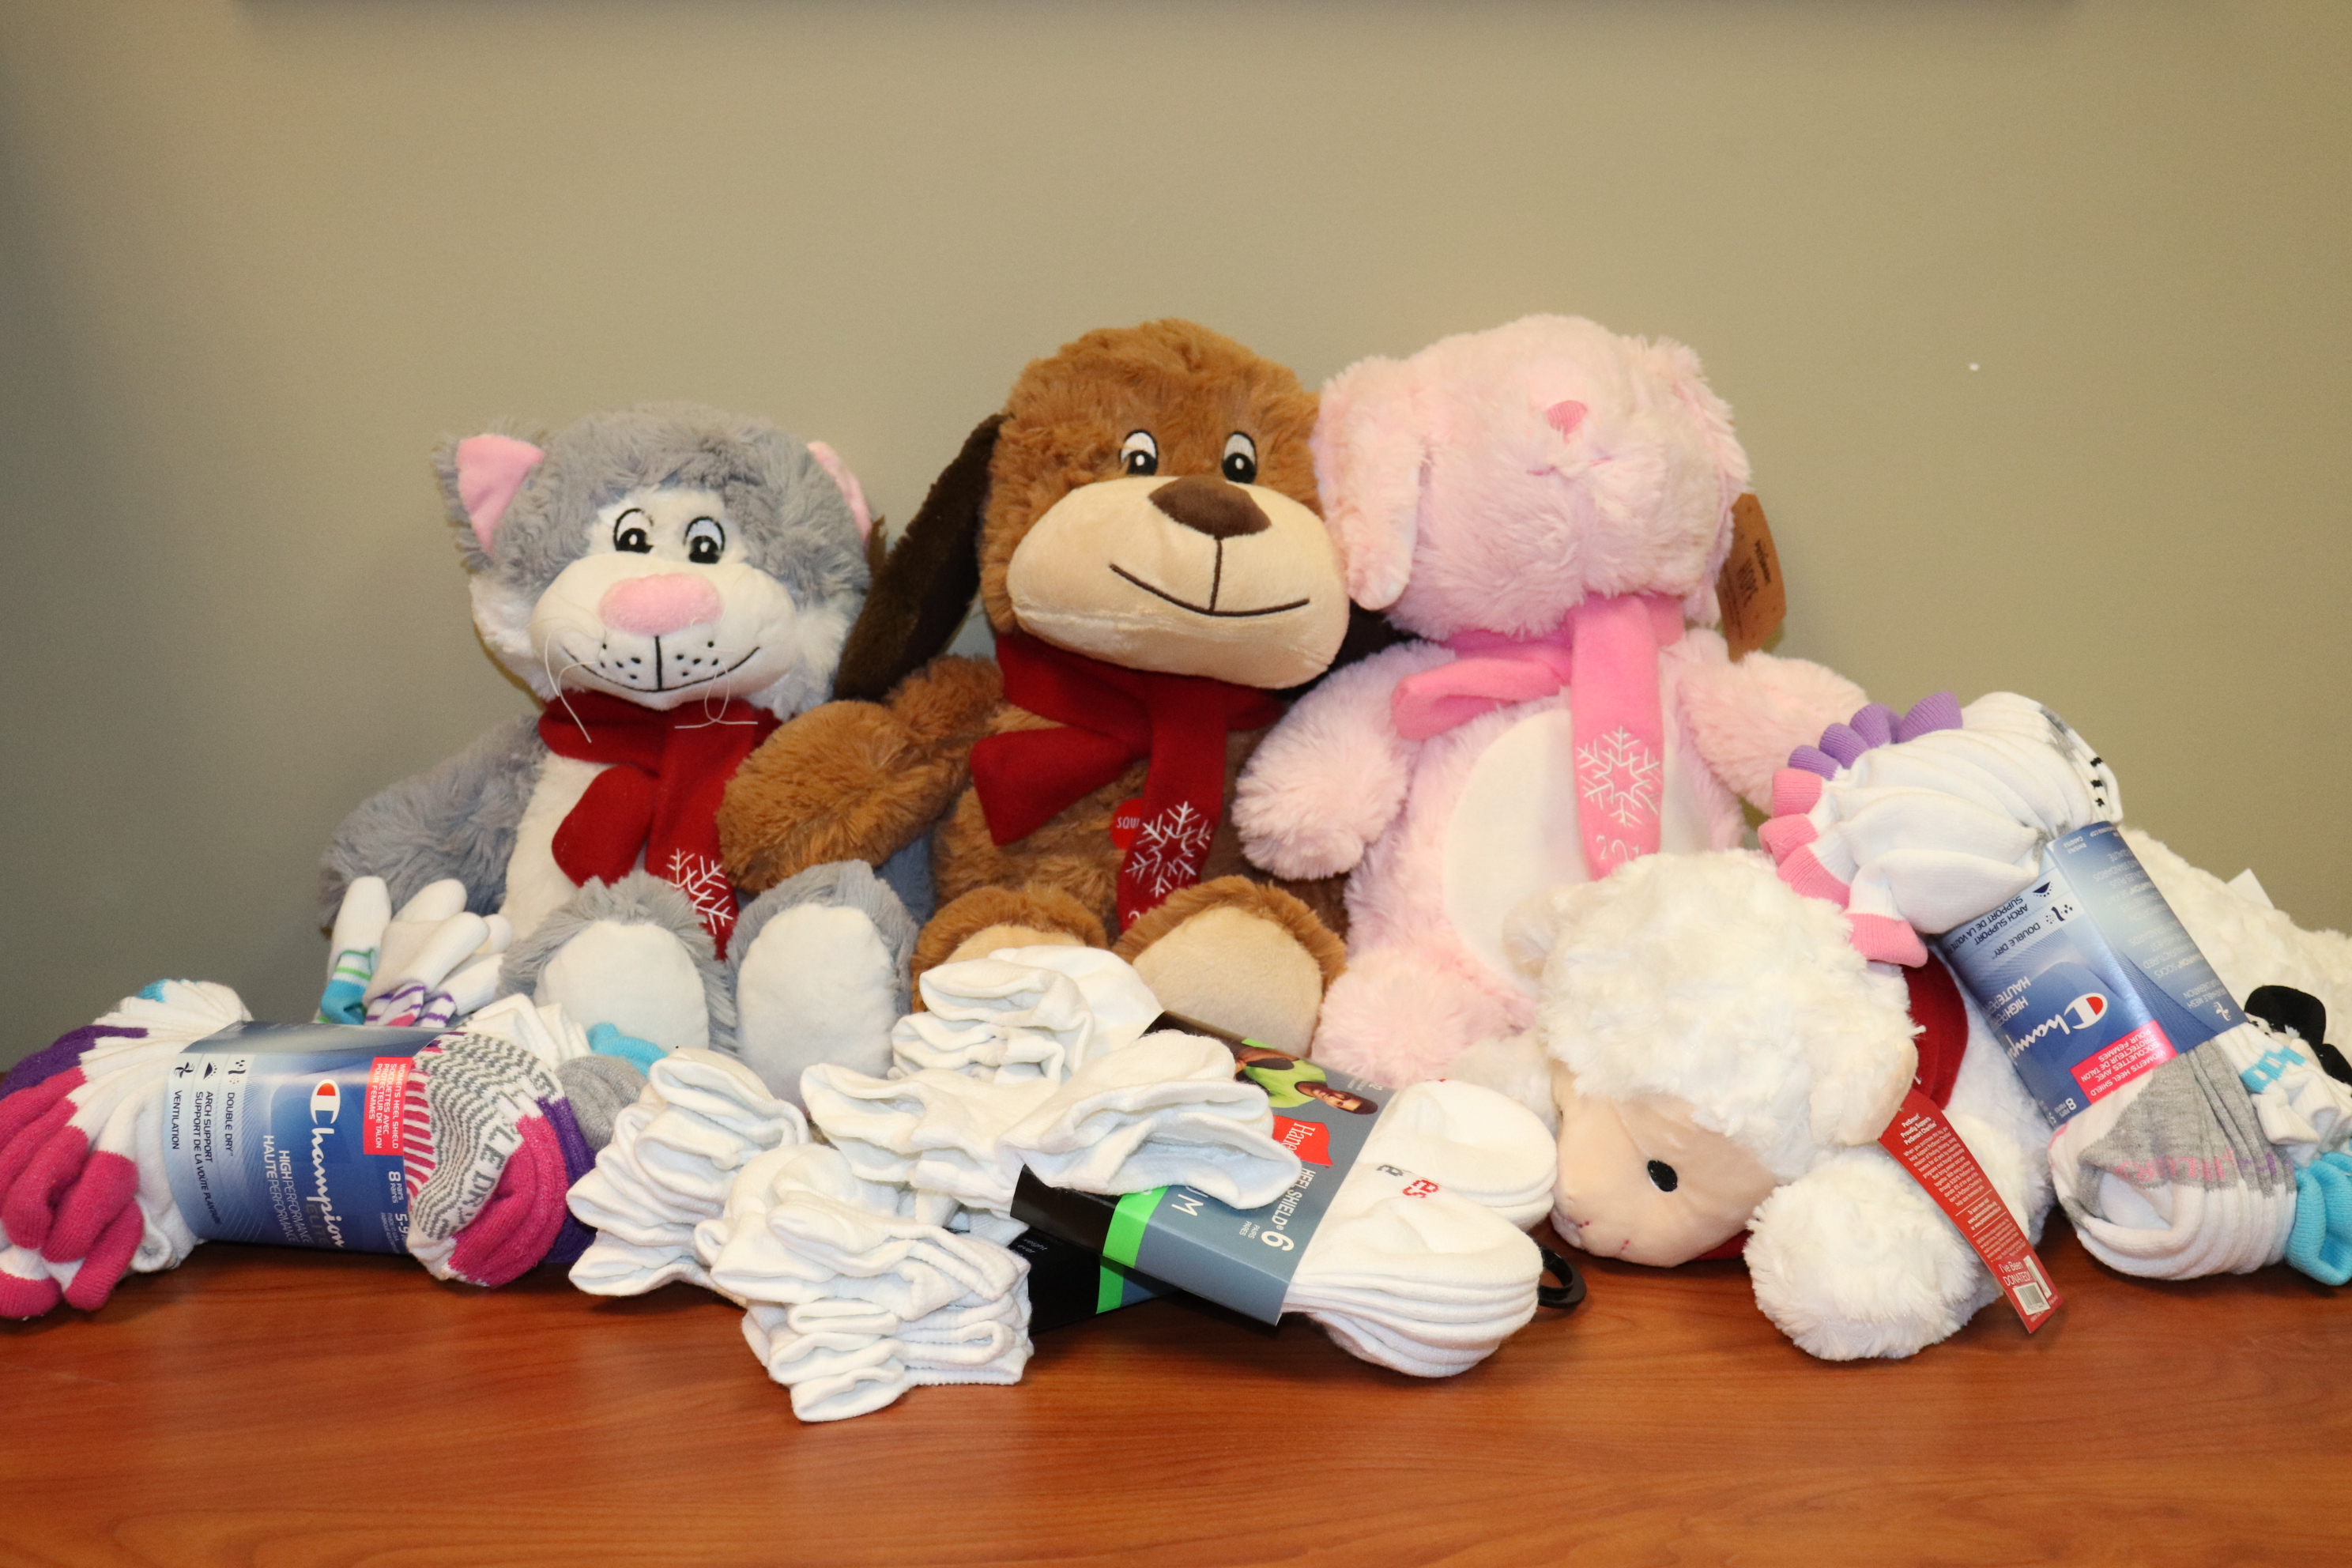 Canopy Children’s Solutions Receives In-Kind Donations from National Brand Partners